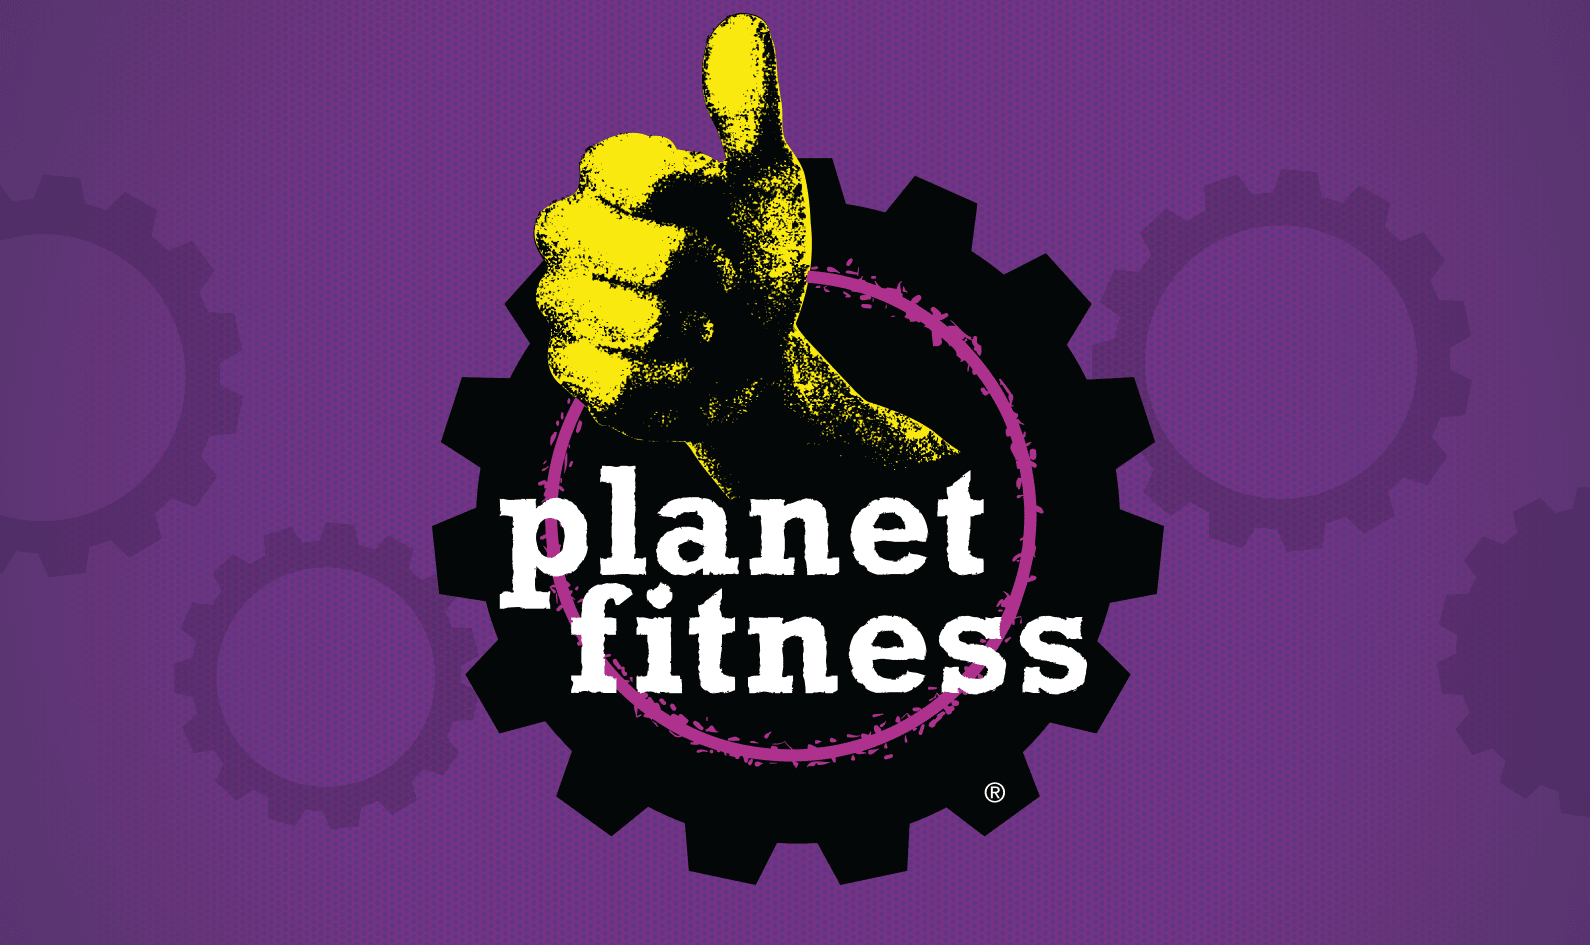 Simple How Many Planet Fitness Gyms In South Africa for Burn Fat fast